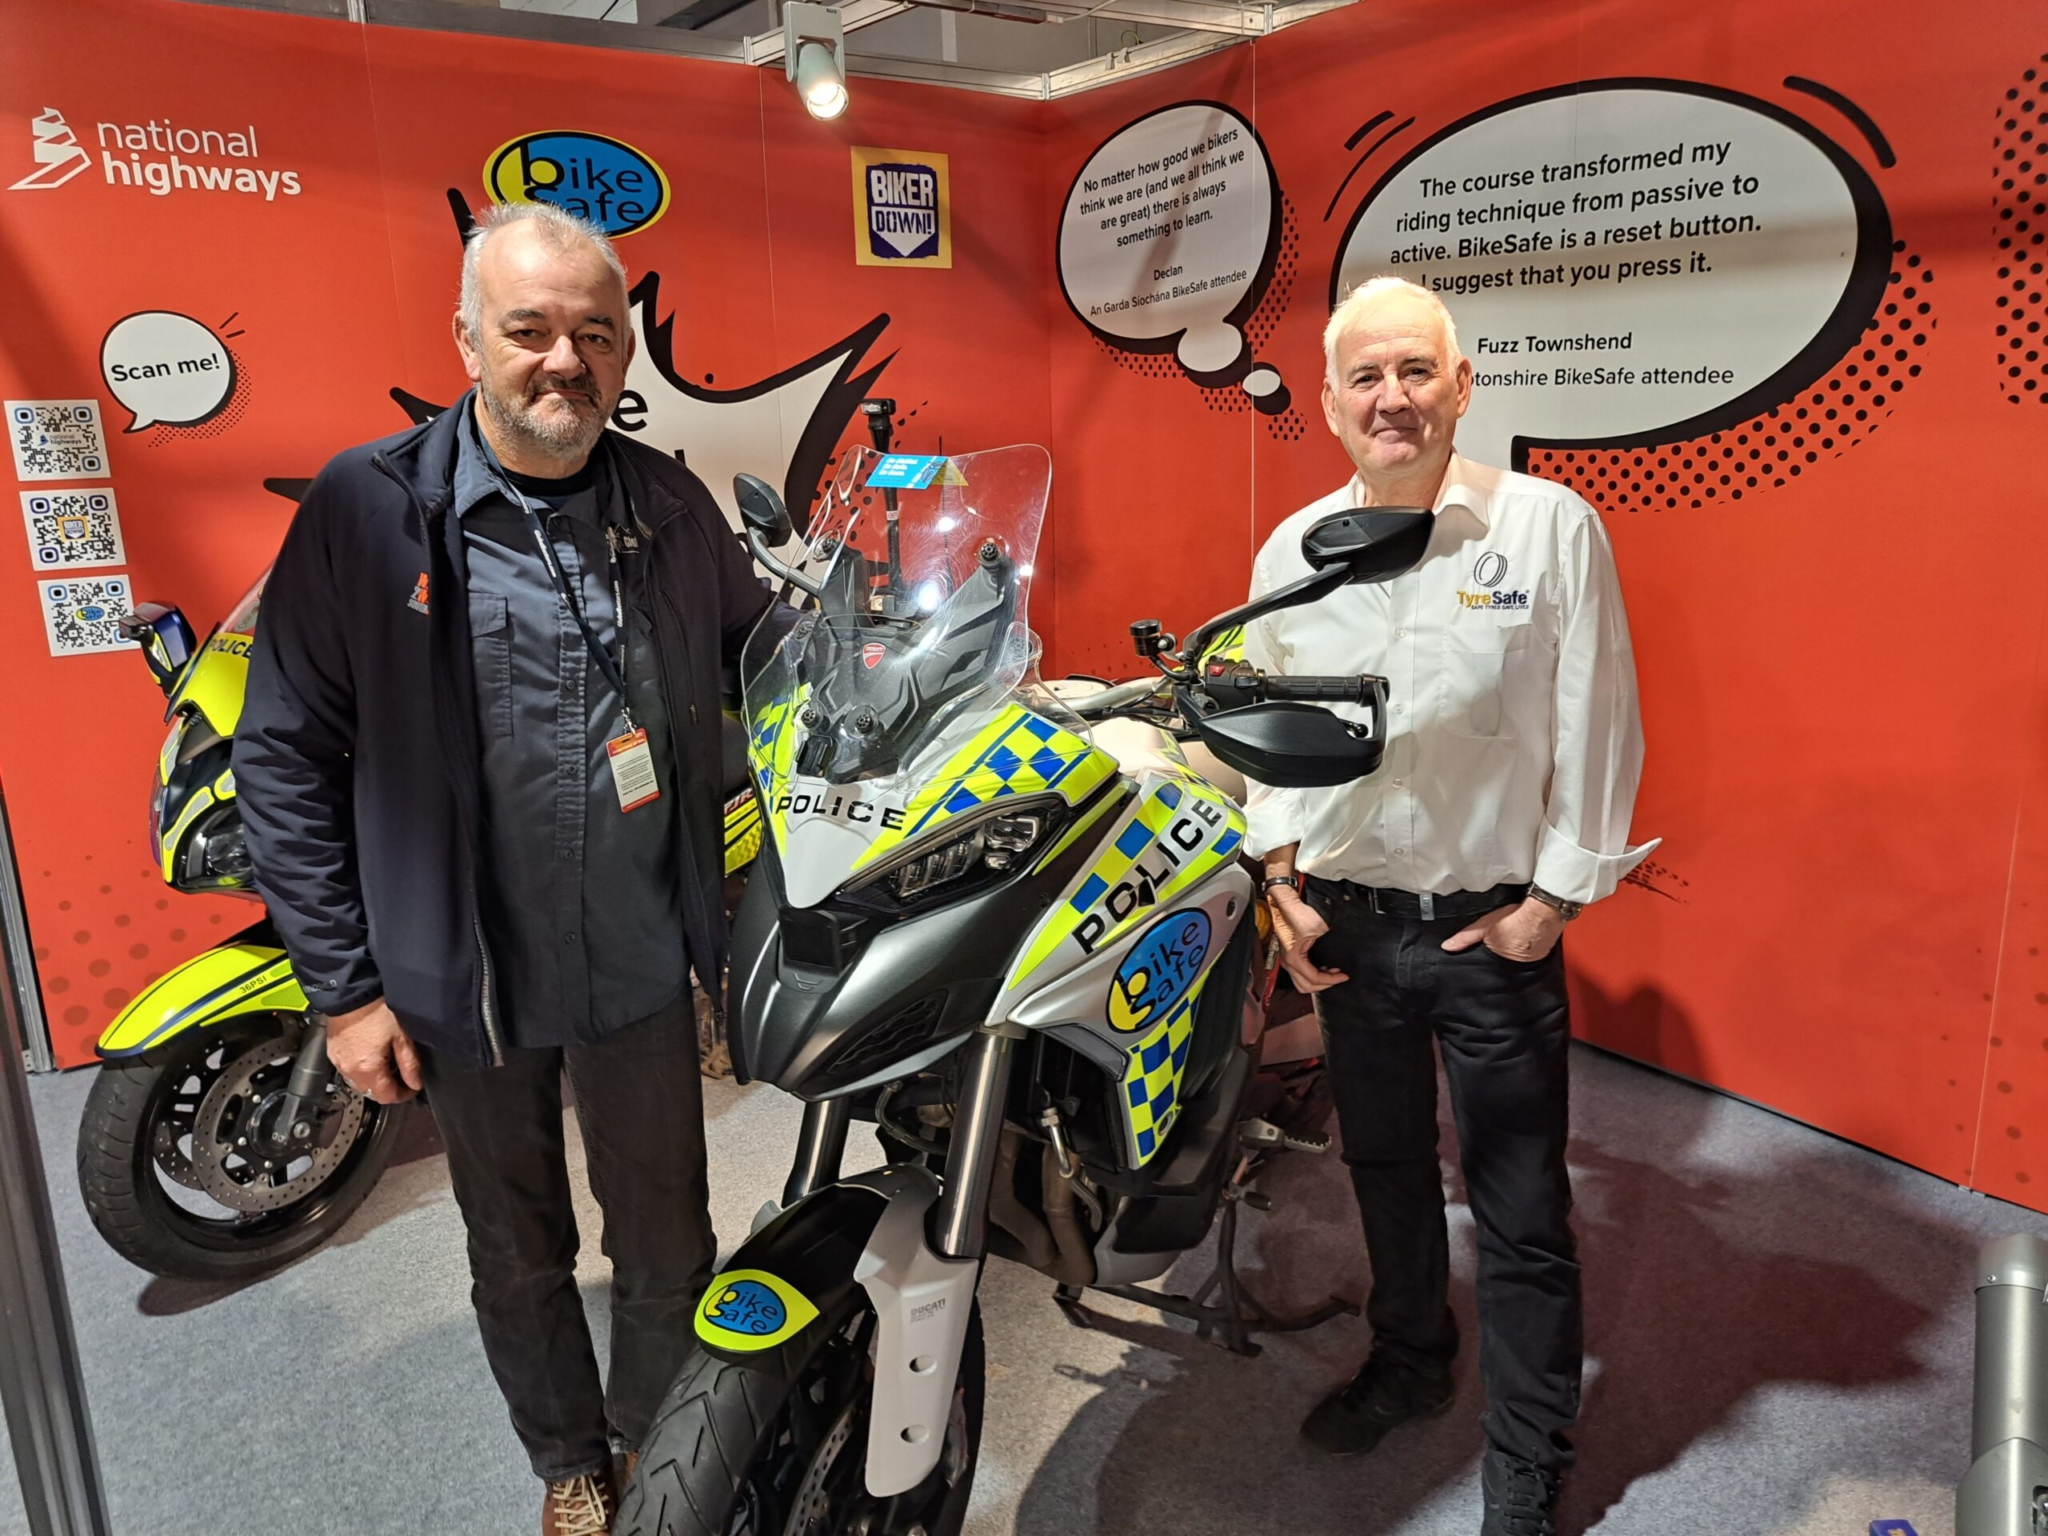 TyreSafe partners with National Motorcyclists Council to promote safe, sustainable biking